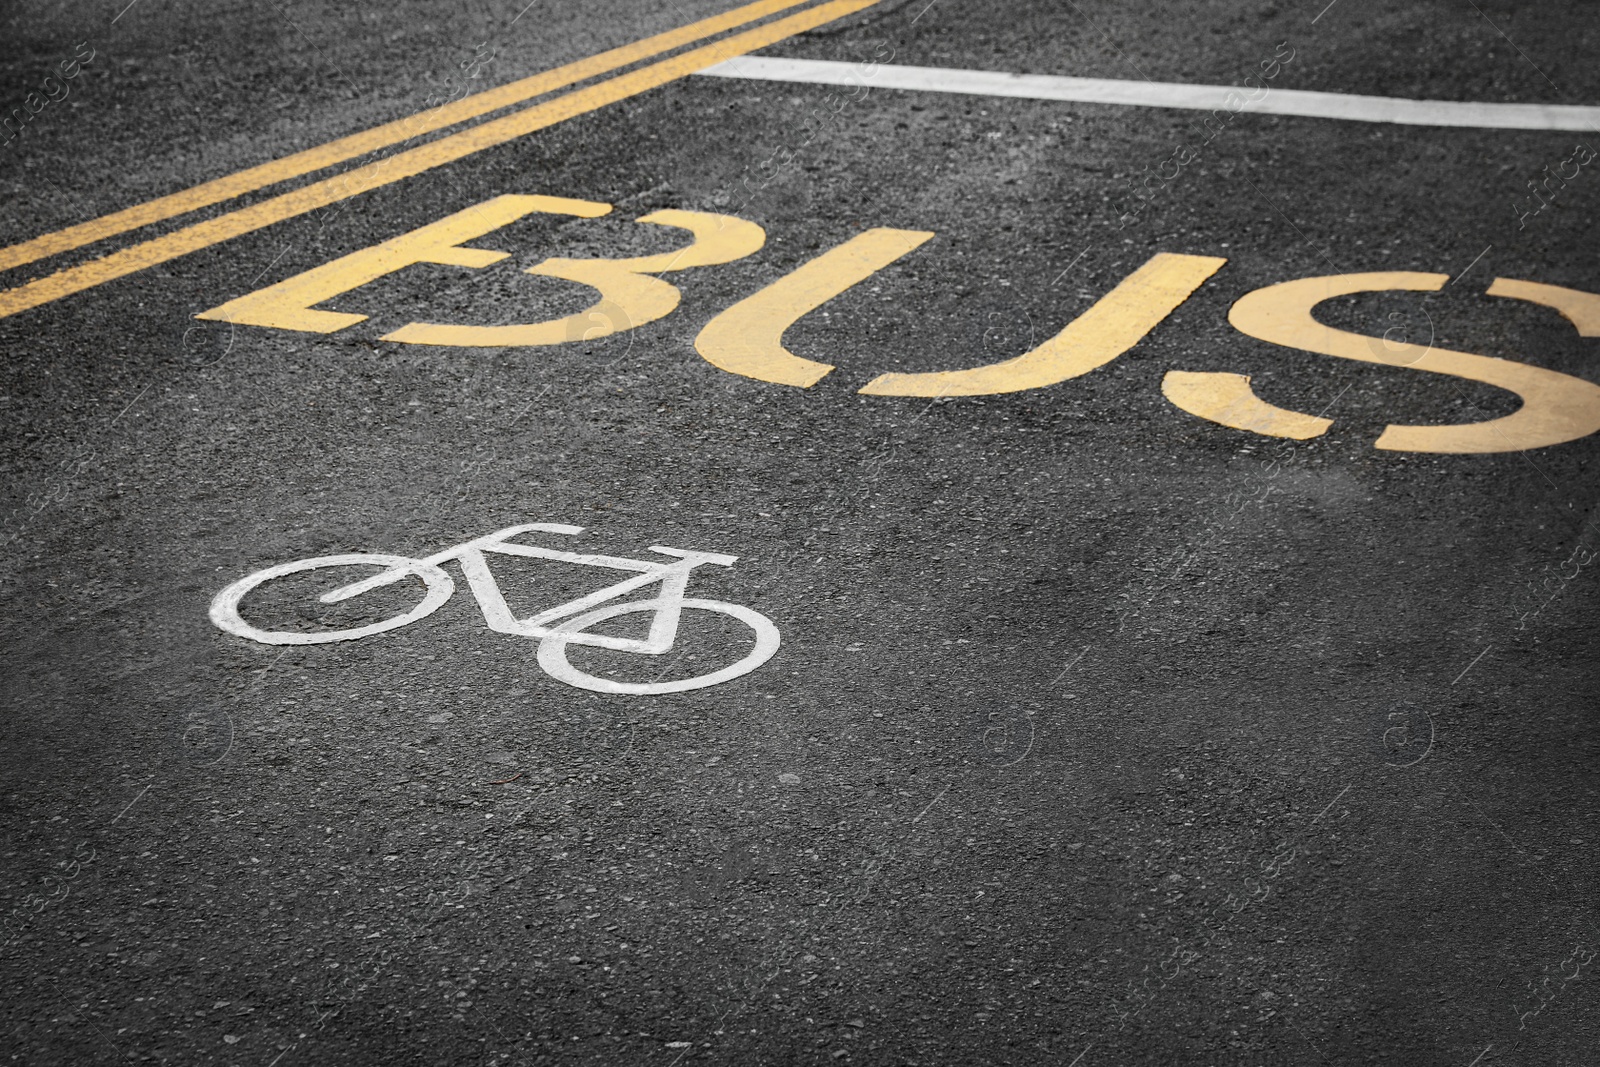 Photo of Bicycle and bus lane signs painted on asphalt